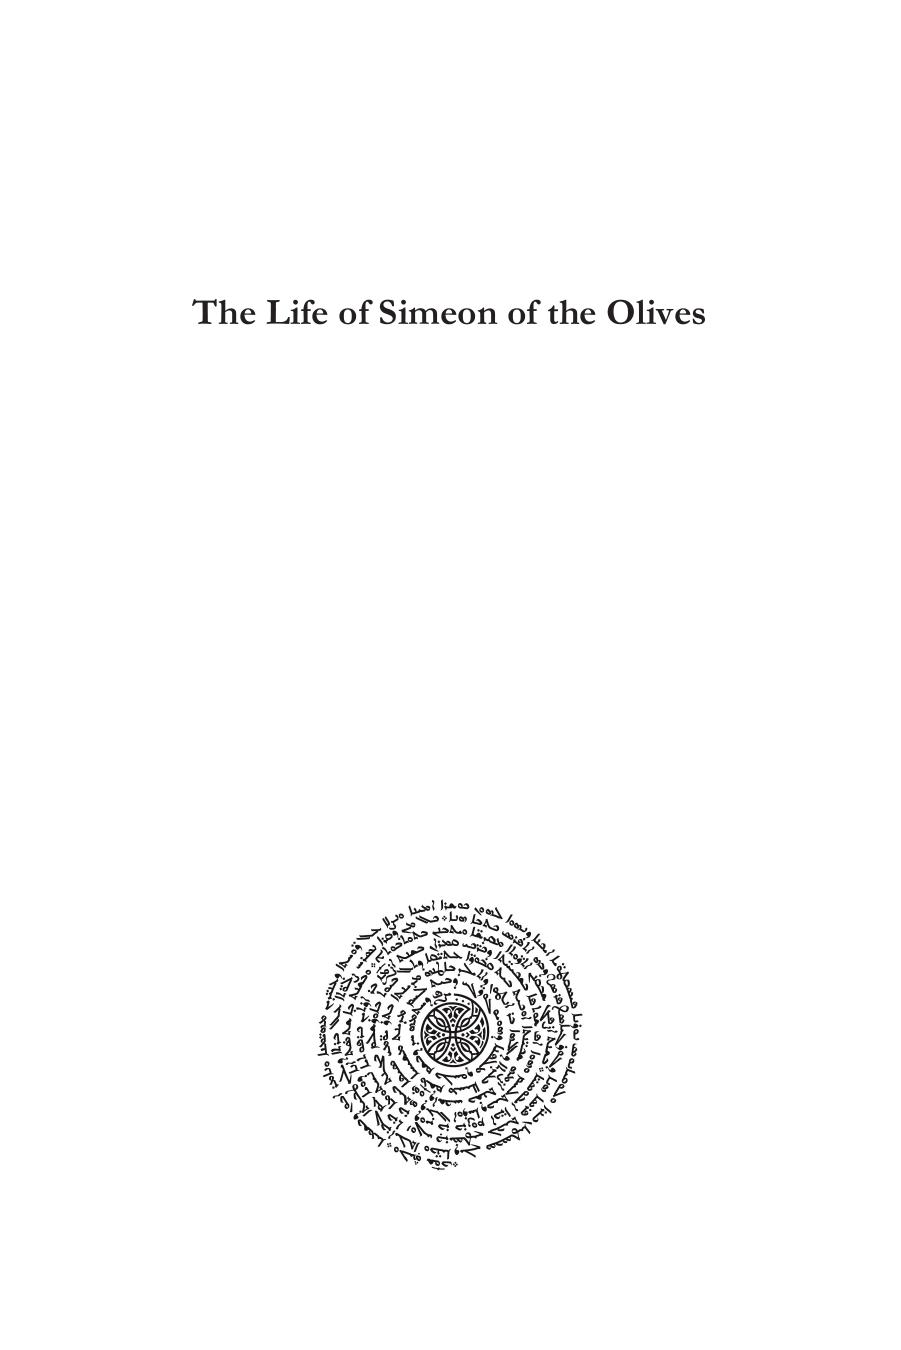 The Life of Simeon of the Olives: An entrepreneurial saint of early Islamic North Mesopotamia (Texts from Christian Late Antiquity) by Robert Hoyland